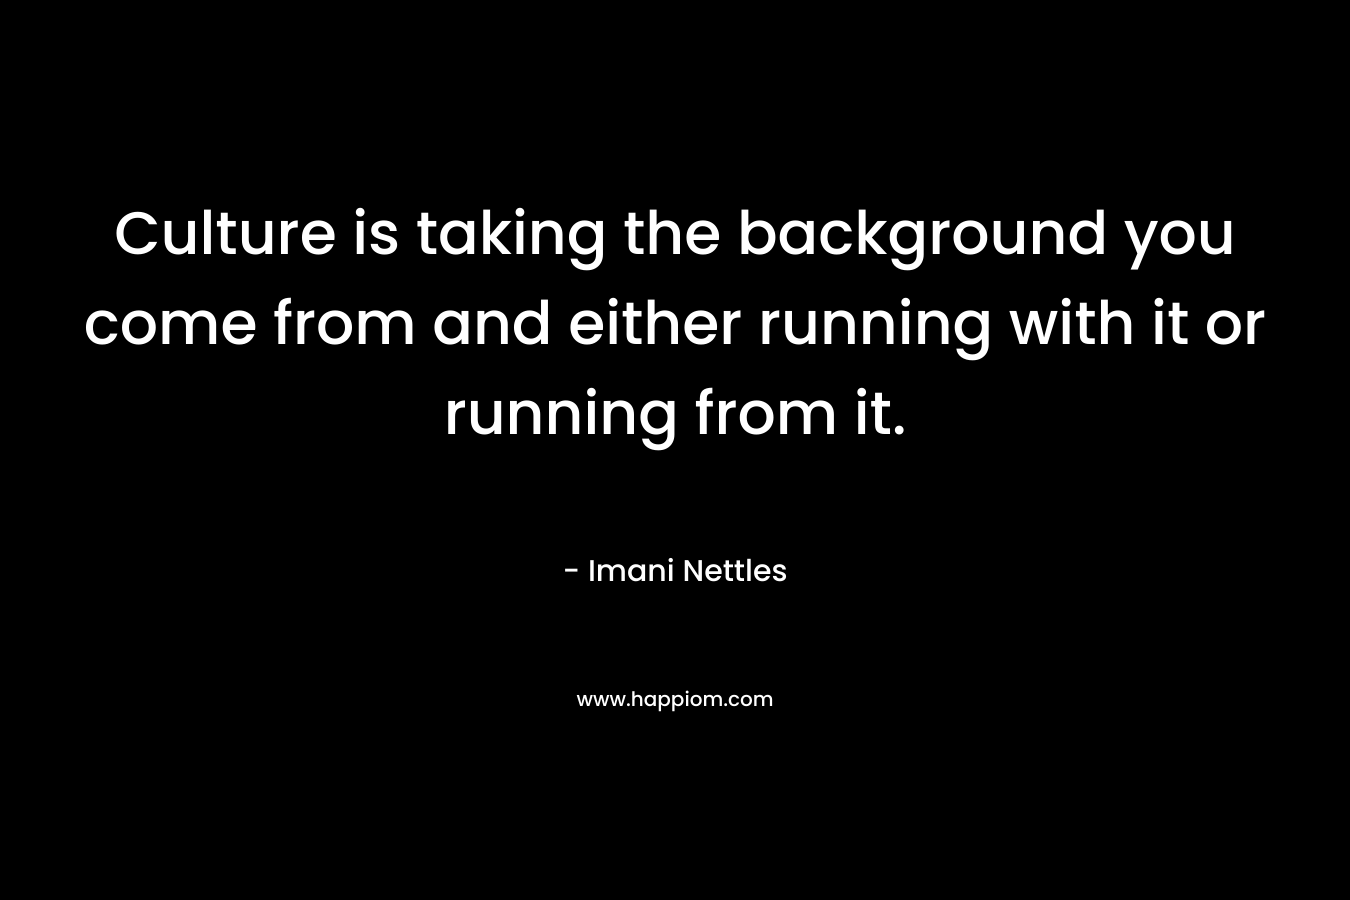 Culture is taking the background you come from and either running with it or running from it.